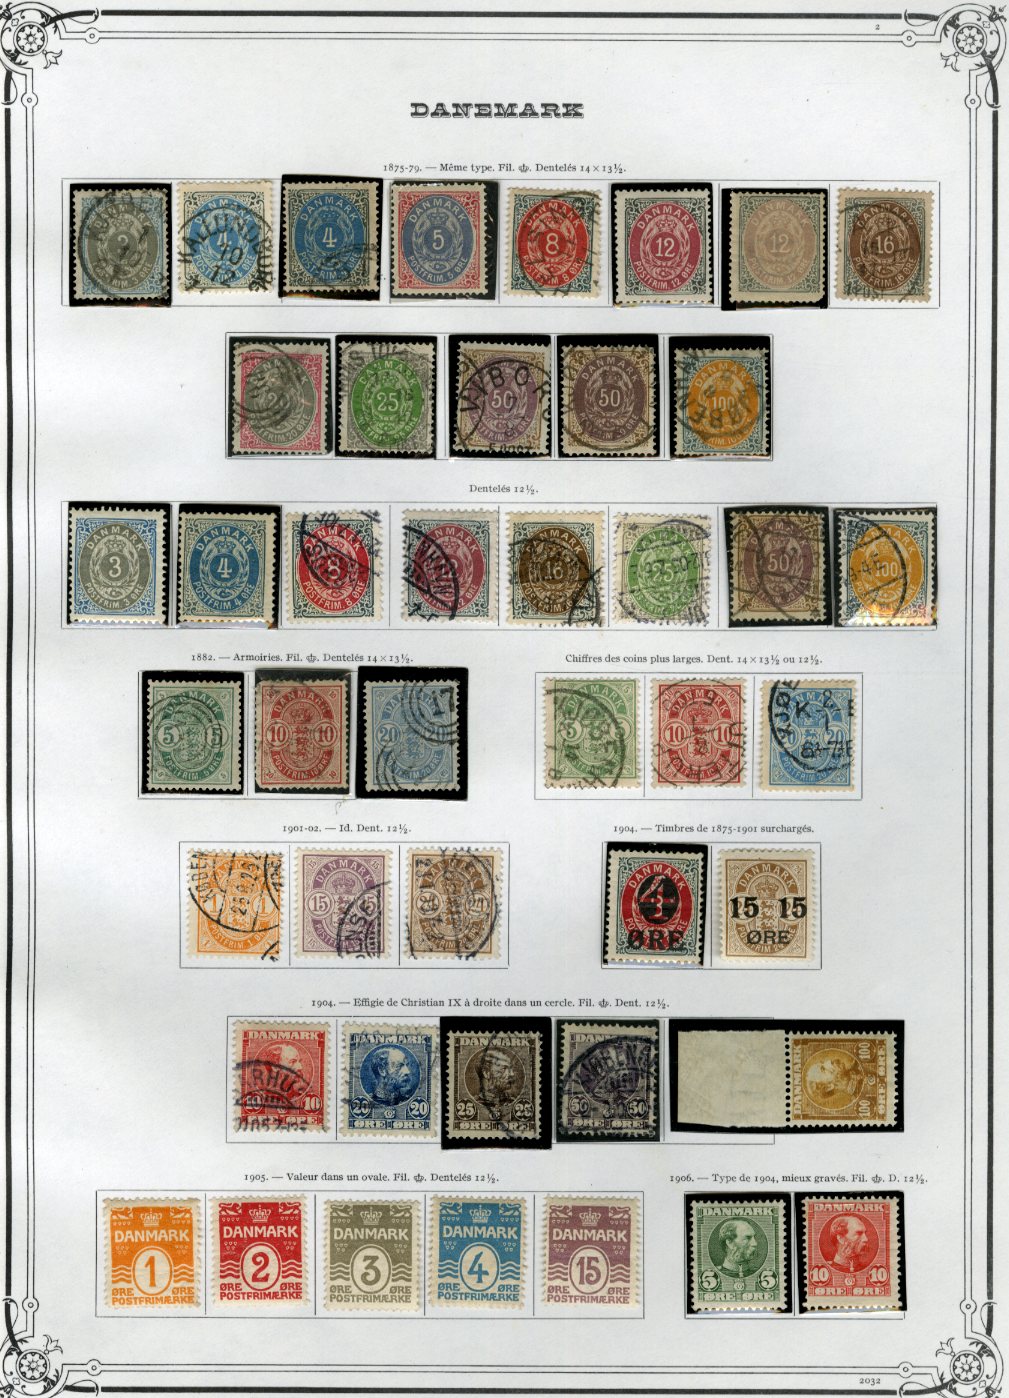 Lot 1431 - LARGE LOTS AND COLLECTIONS IRAN  -  Cherrystone Auctions U.S. & Worldwide Stamps & Postal History